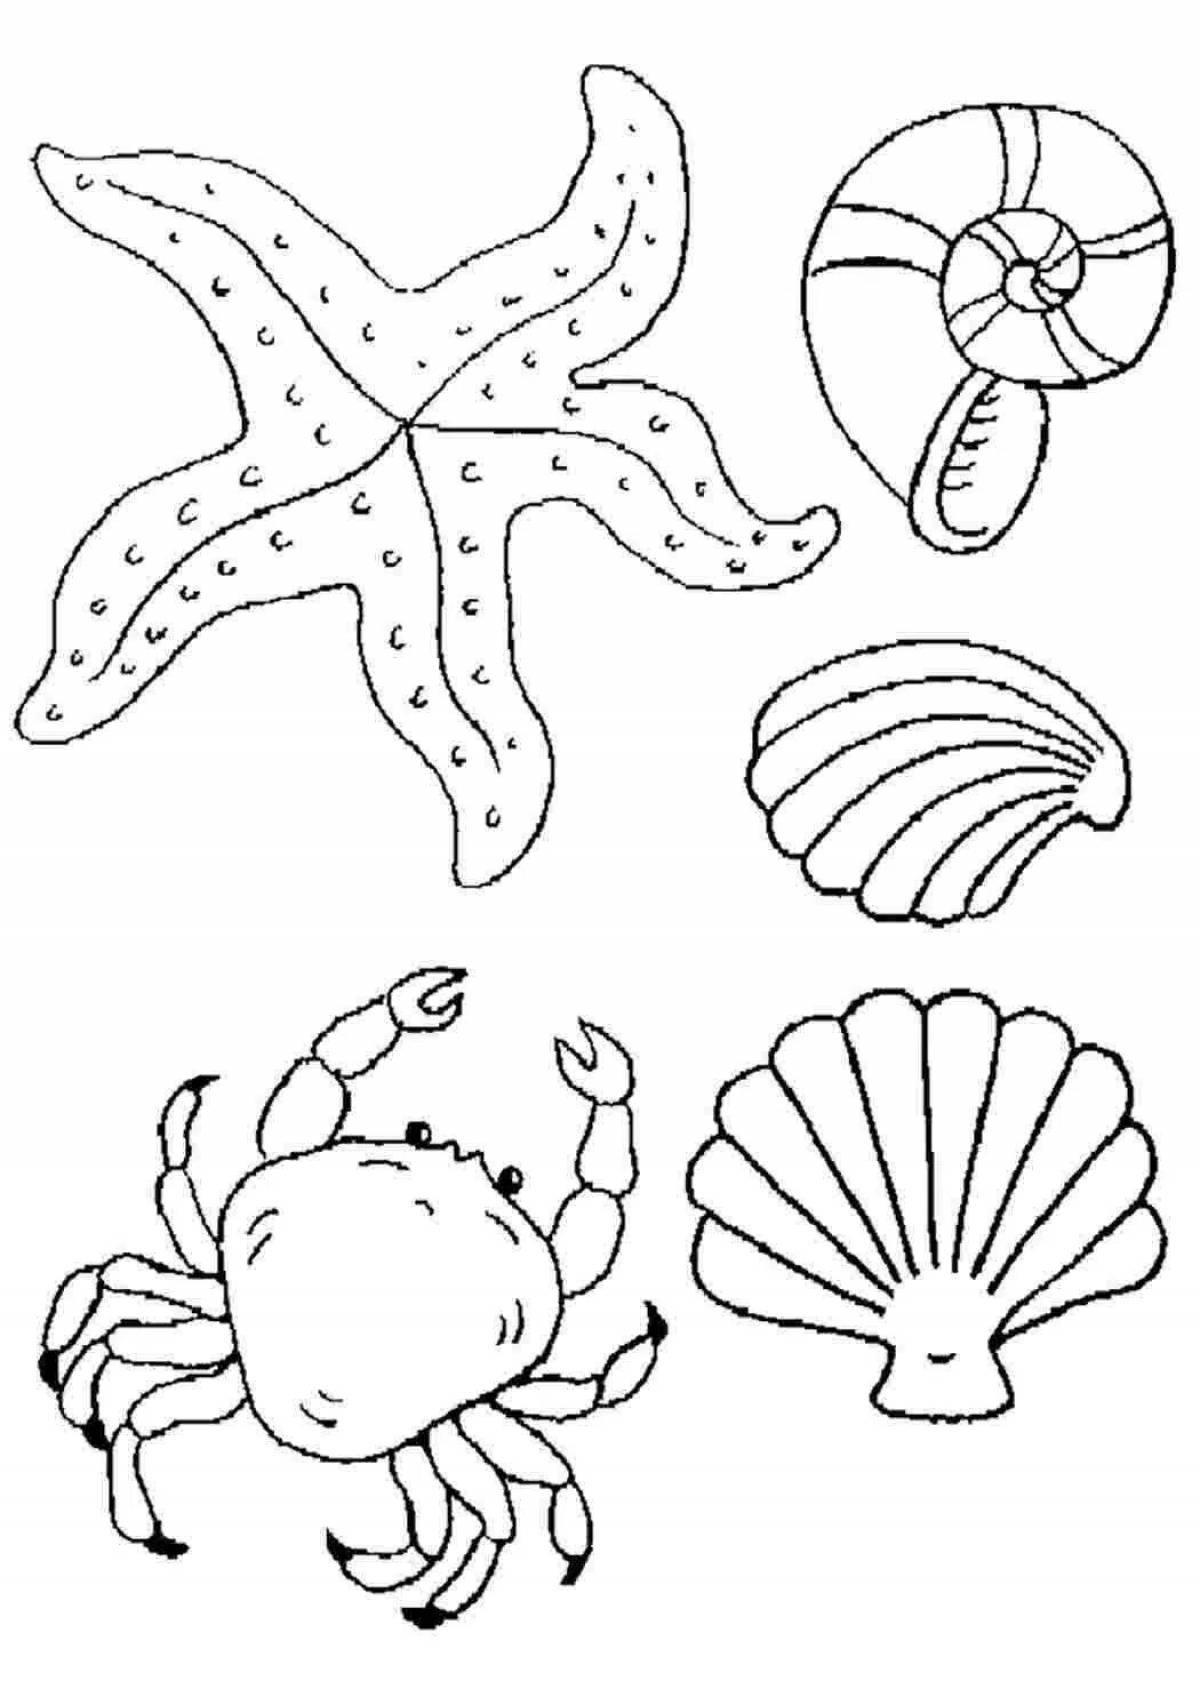 Amazing underwater life coloring pages